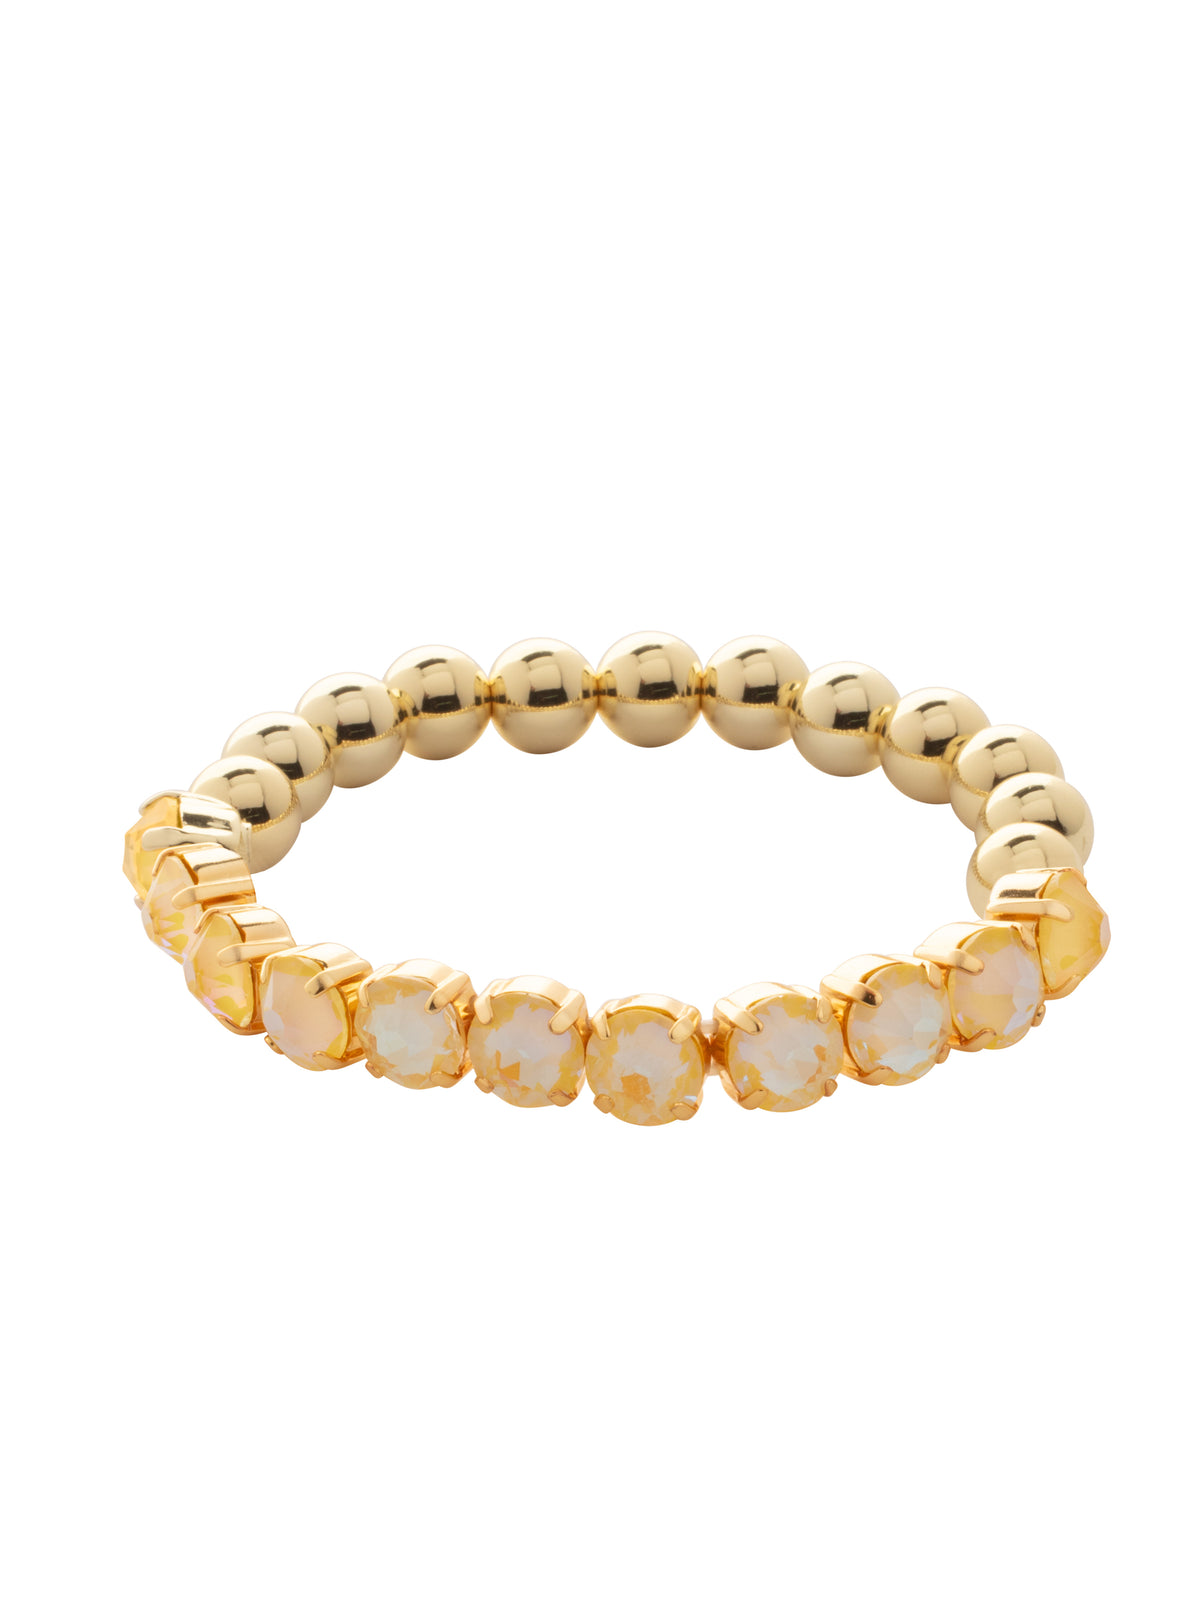 Crystal Zola Stretch Bracelet - 4BFJ40BGLTD - <p>Crystal Zola Stretch Bracelet features a side of repeating metal beads and a side of round cut crystals on a multi-layered stretchy jewelry filament, creating a durable and trendy piece. From Sorrelli's Light Topaz Delite collection in our Bright Gold-tone finish.</p>